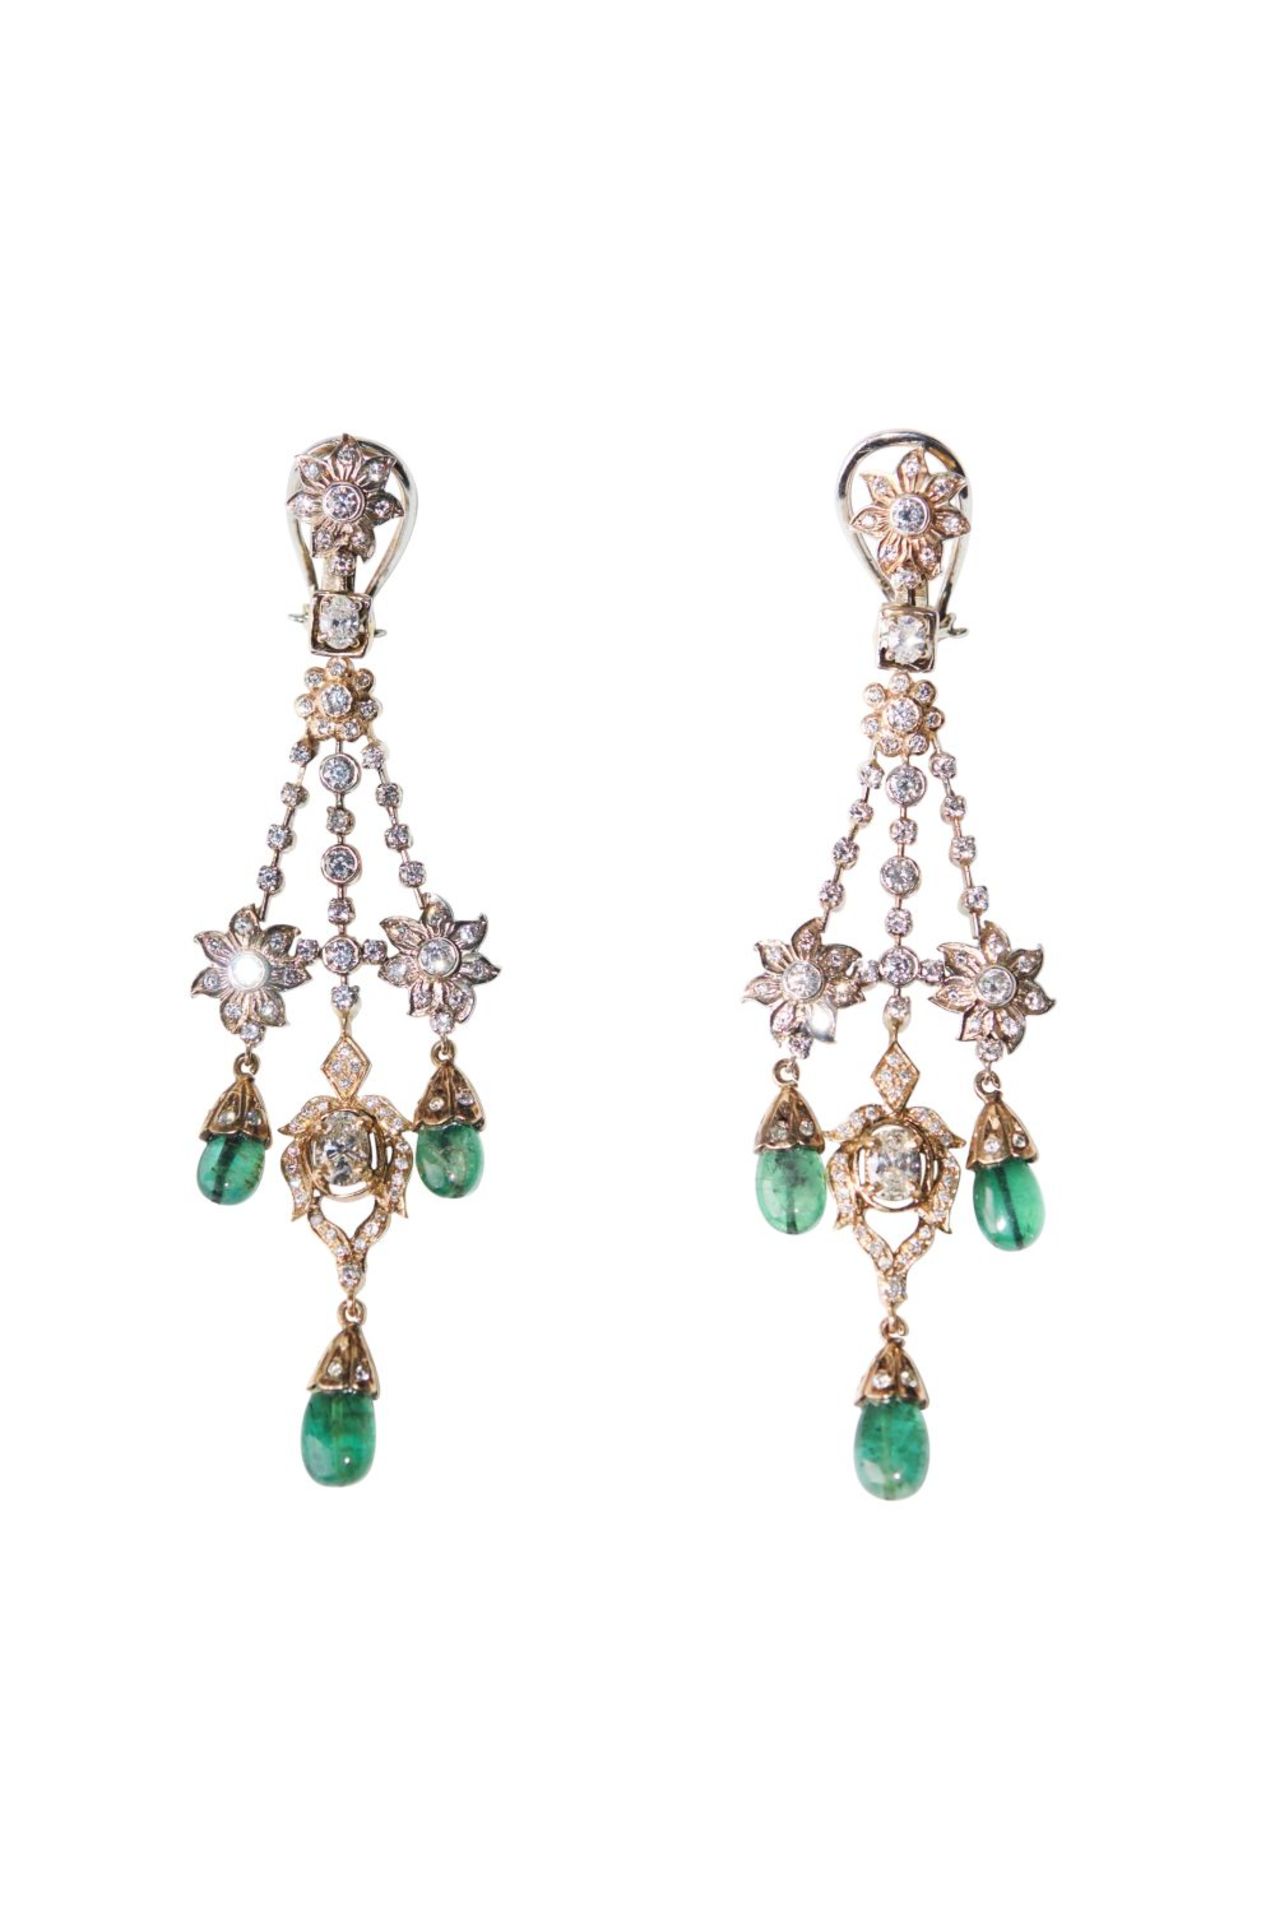 Brilliant emerald ear clips18Kt pink gold ear clips with diamonds total carat weight approx. 3,2ct - Bild 2 aus 4